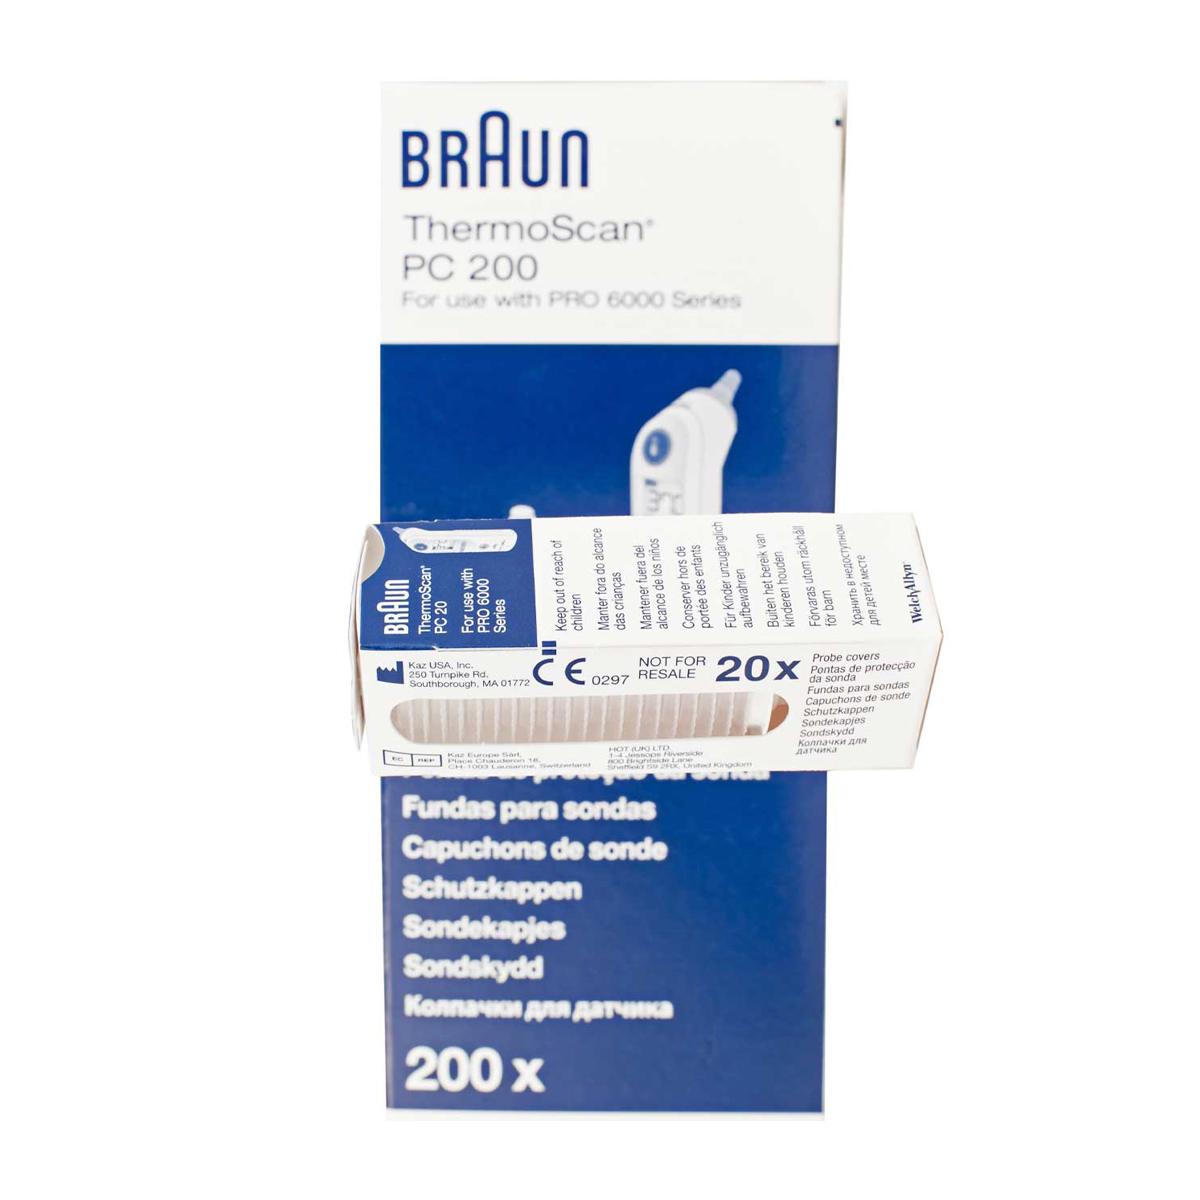 Pack of 200 Braun Thermoscan Probe Covers for Pro4000 and Pro6000 detail